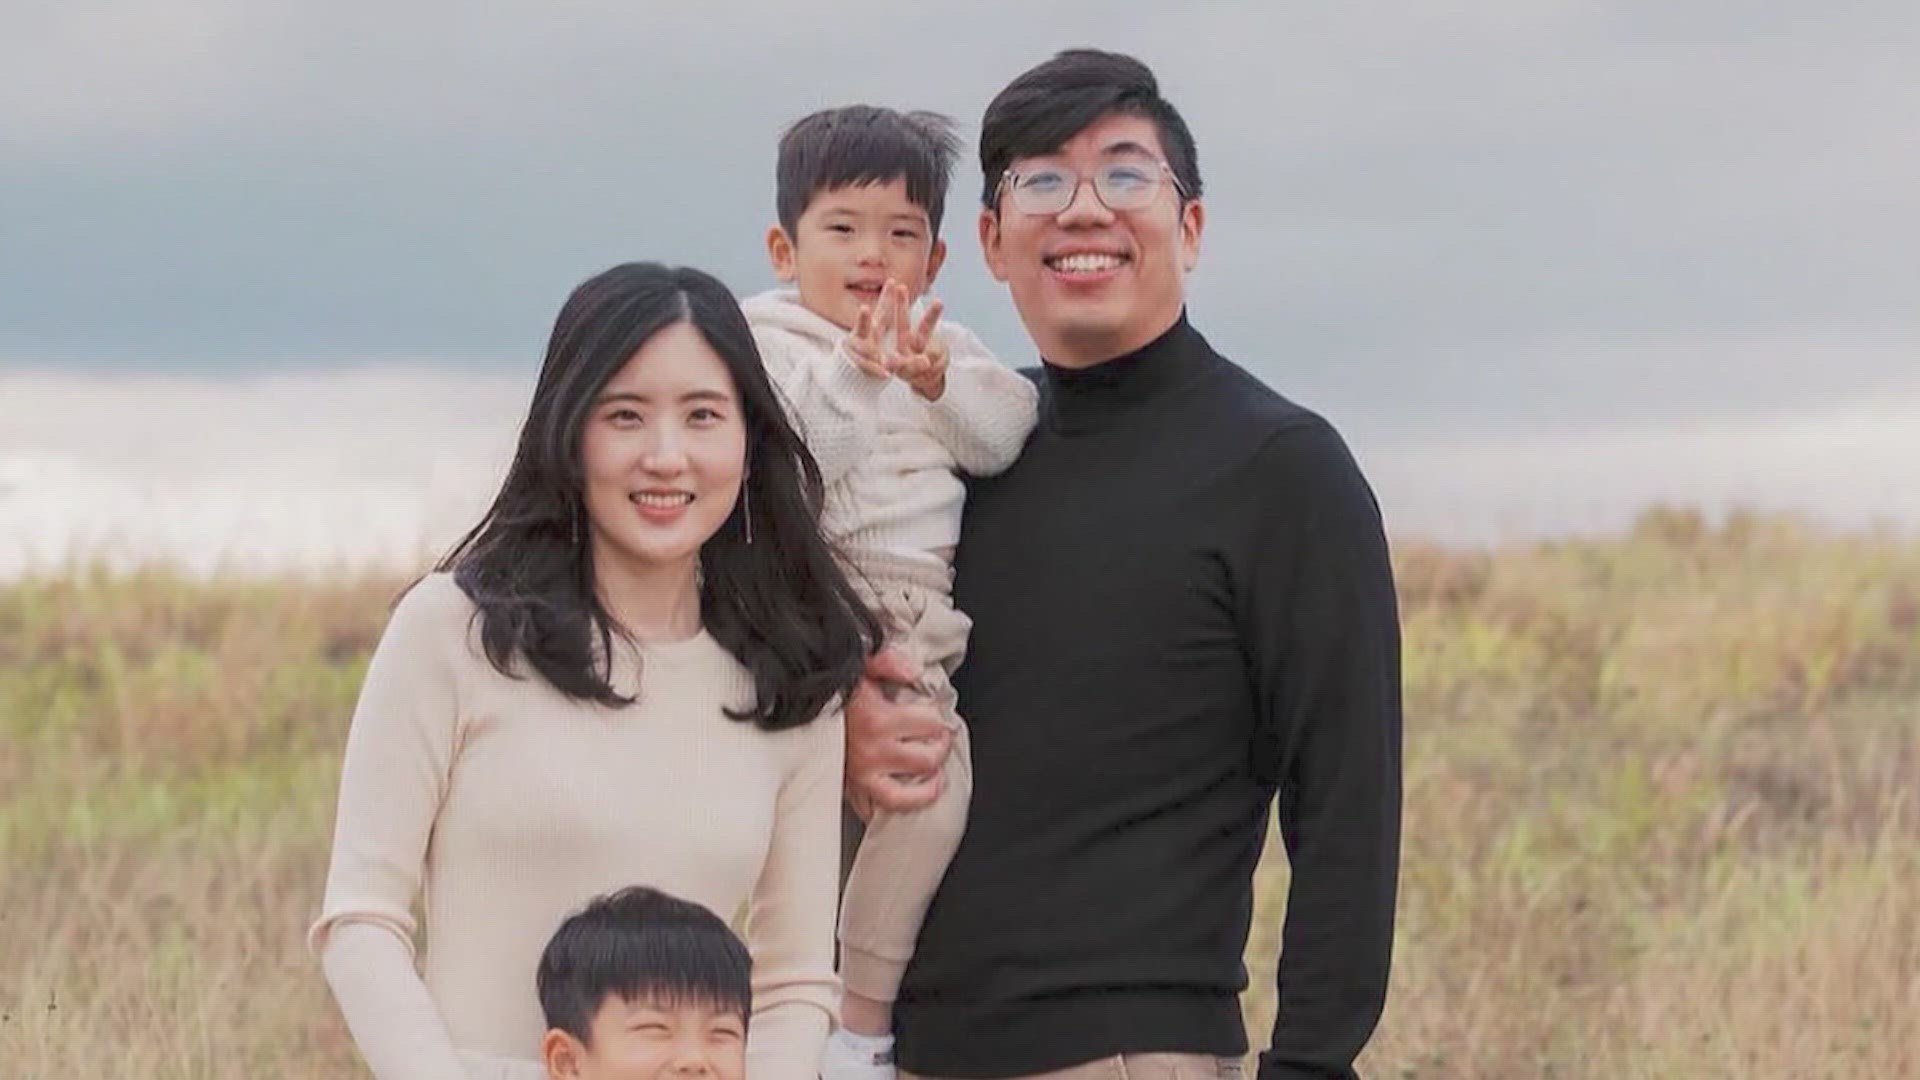 The Cho family, Kyu, Cindy and their 3-year-old son James, who died in the attack, will be laid to rest.